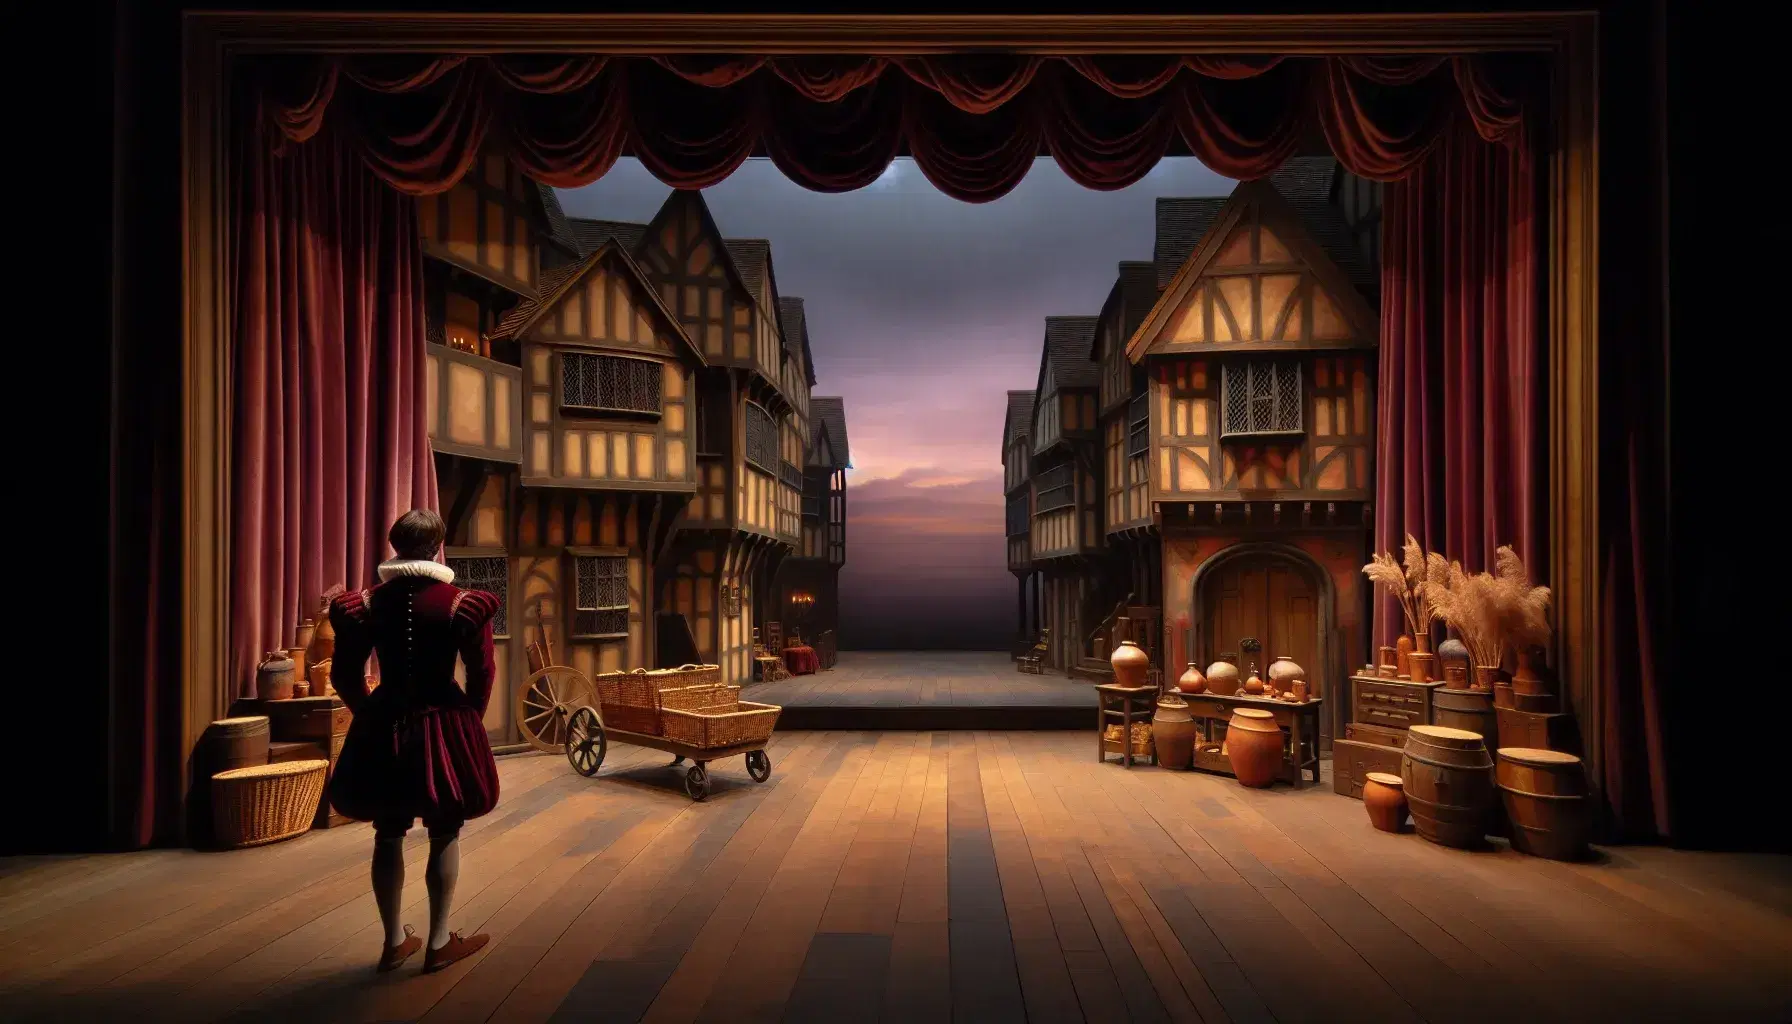 Theater scene ready for a Shakespearean performance with red curtains, half-timbered houses and actor in period costume.